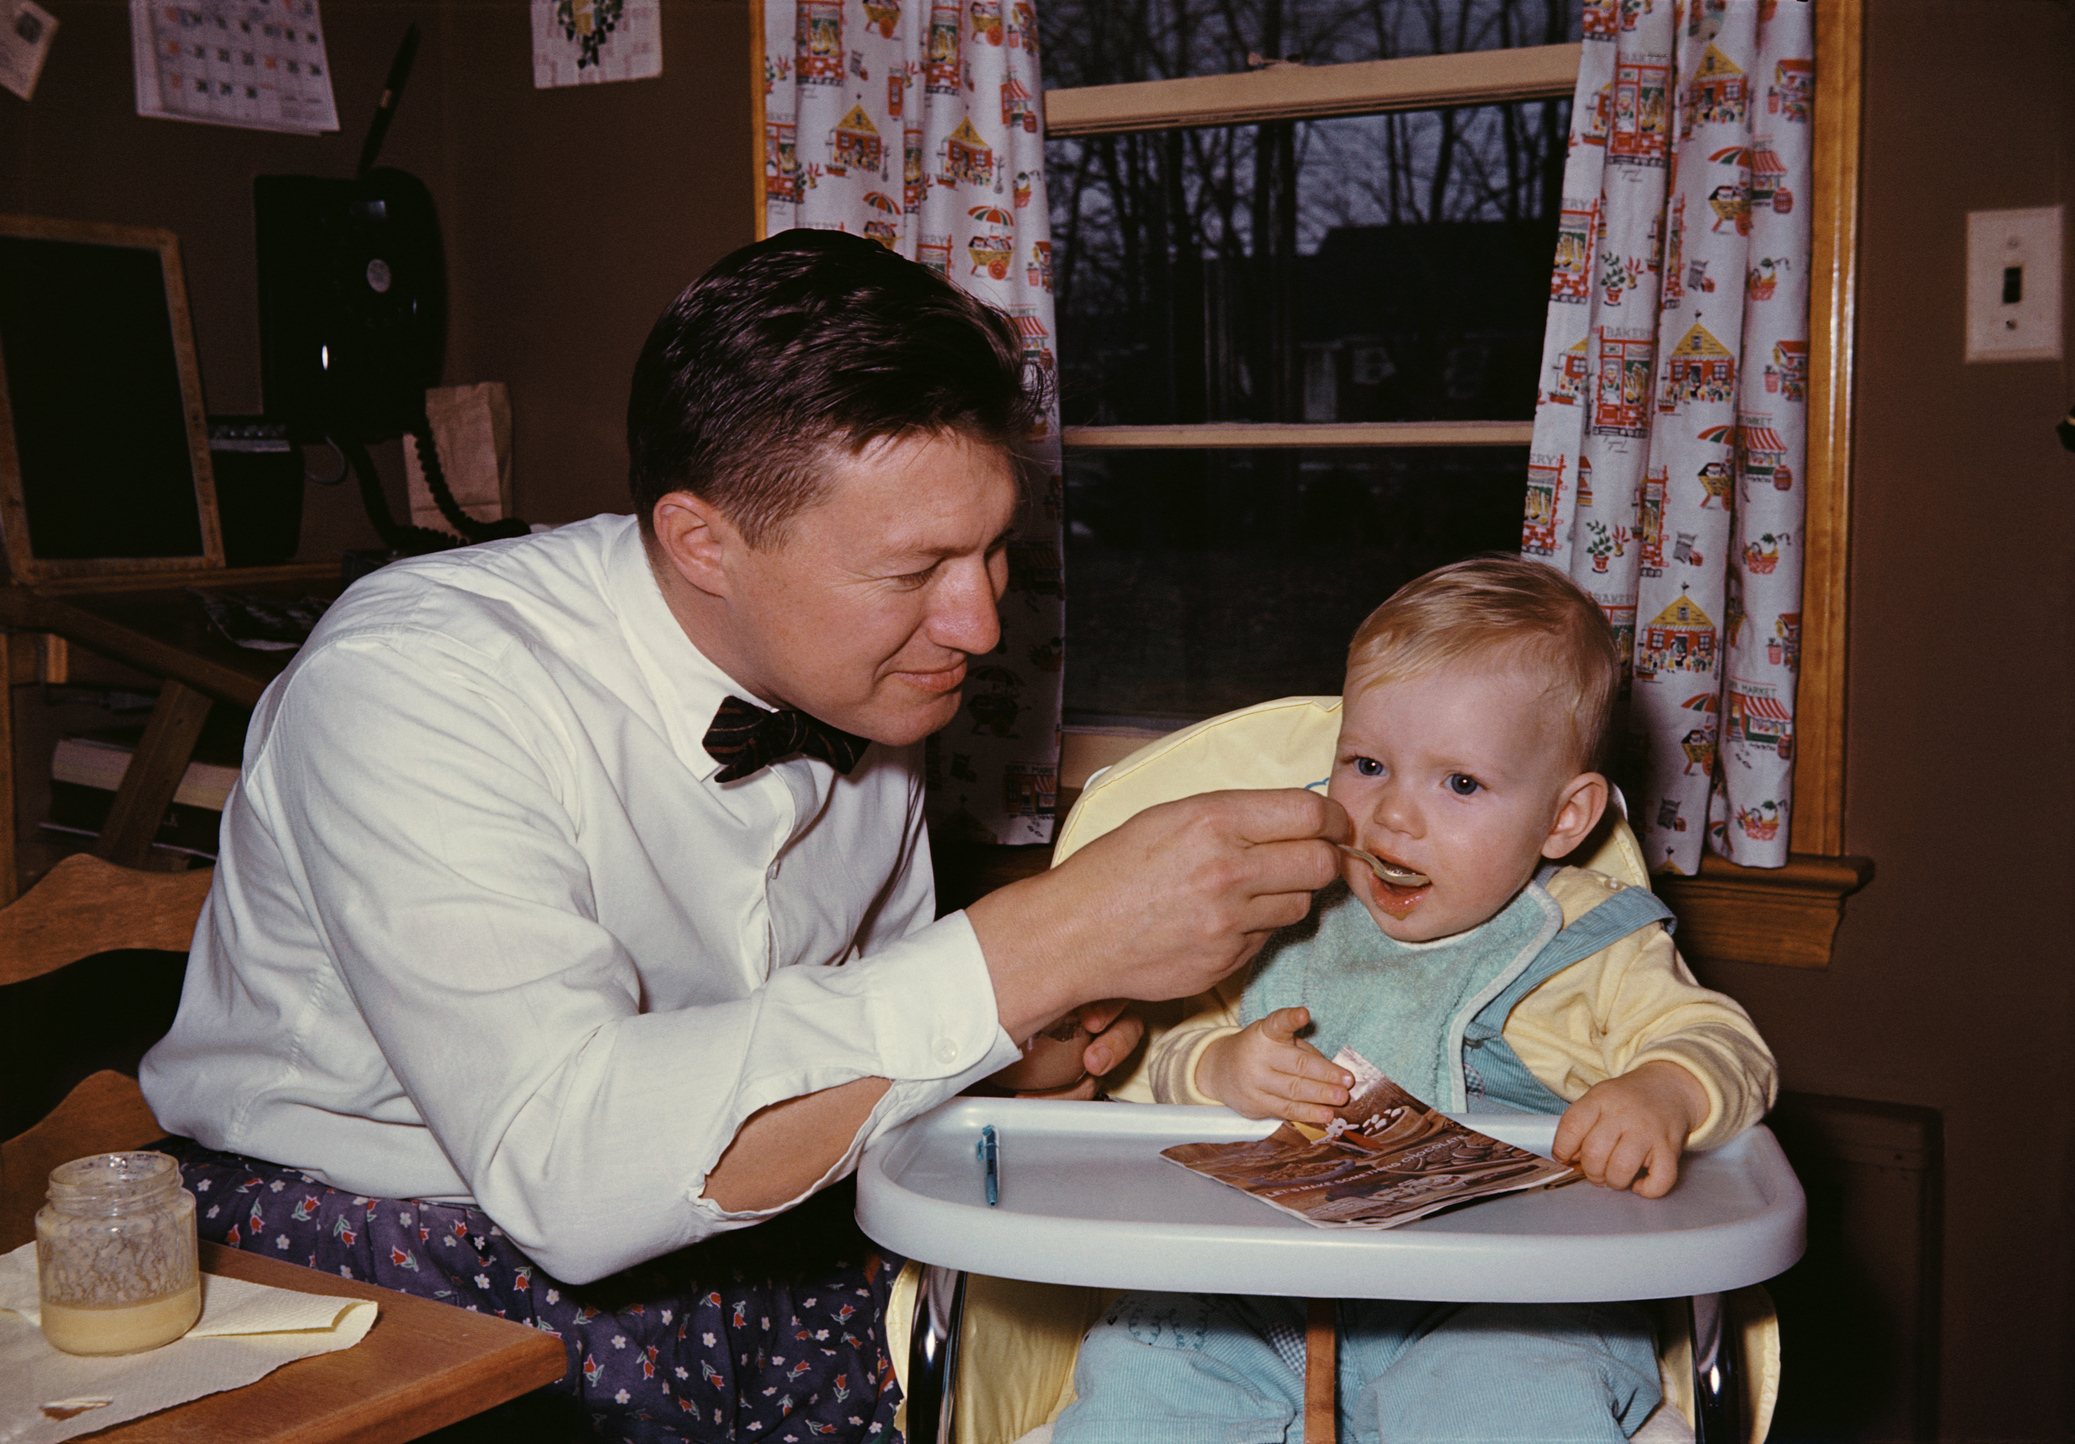 Man feeding a child in a high chair; both are indoors with vintage decor